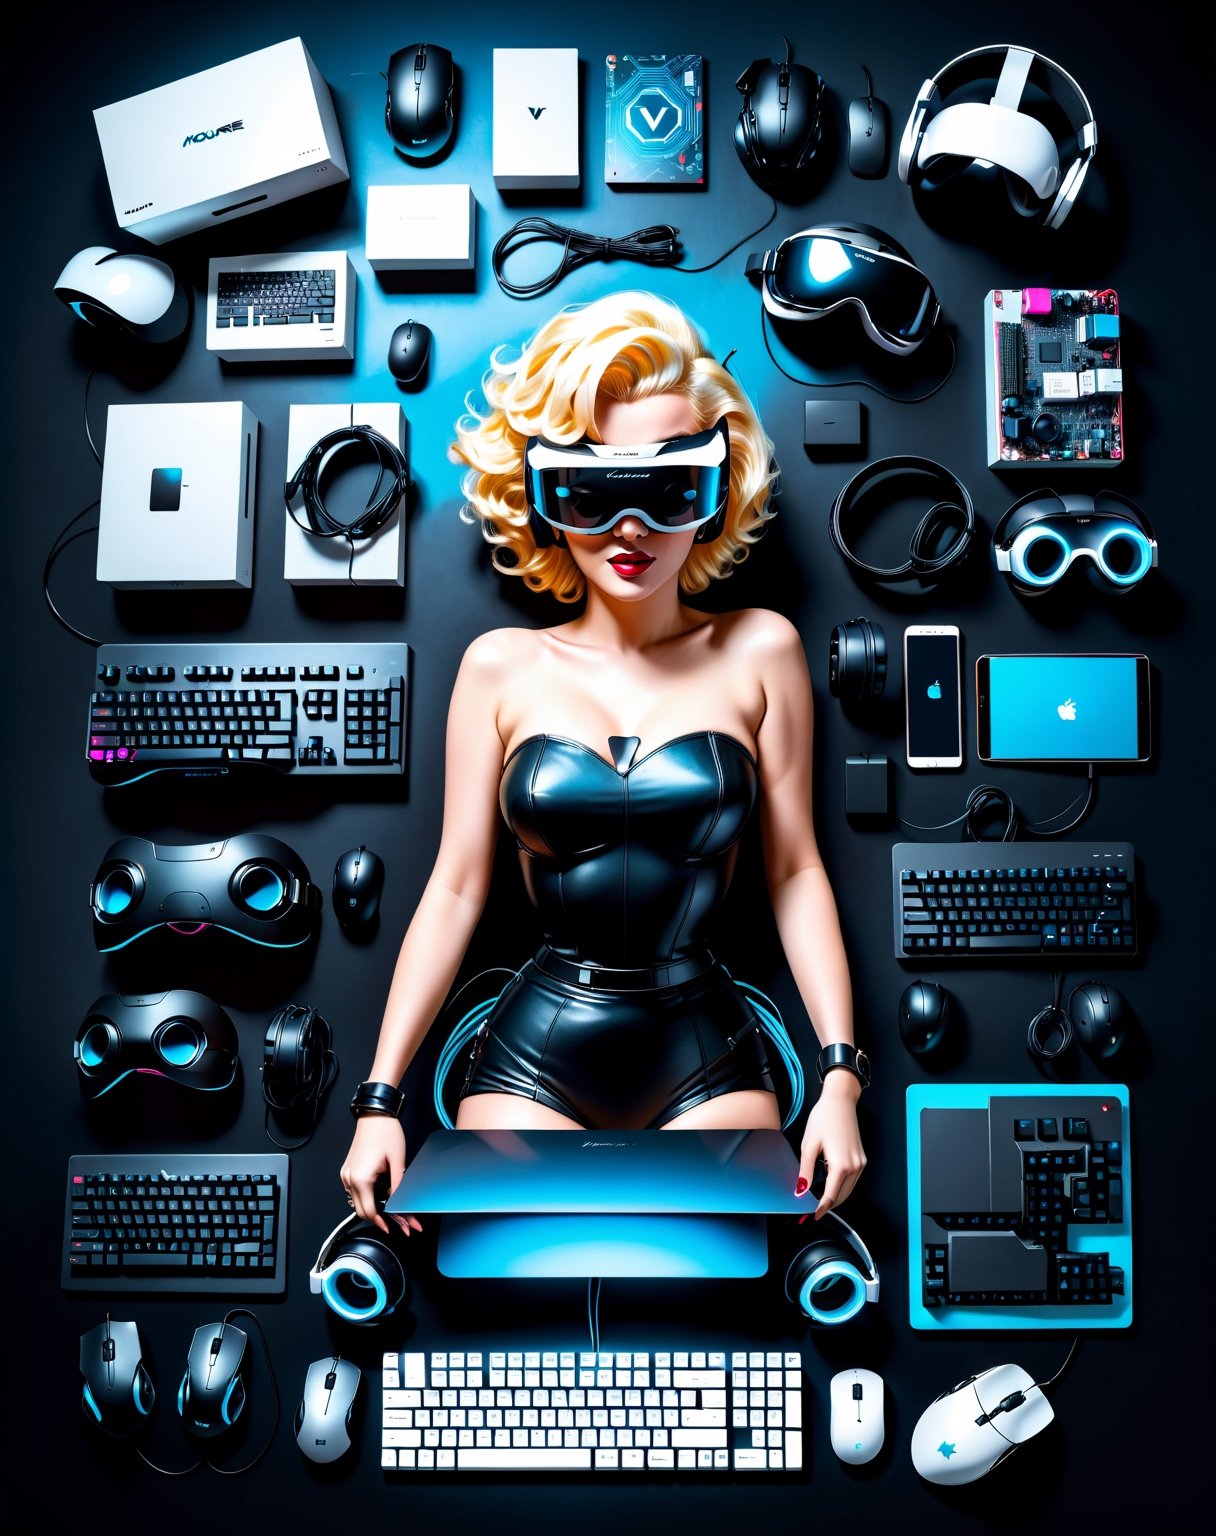 1girl, Marilyn Monroe, wearing VR headset, cyberpunk, flat lay photography, object arrangement, computer equipment, keyboard, mouse, knolling photography